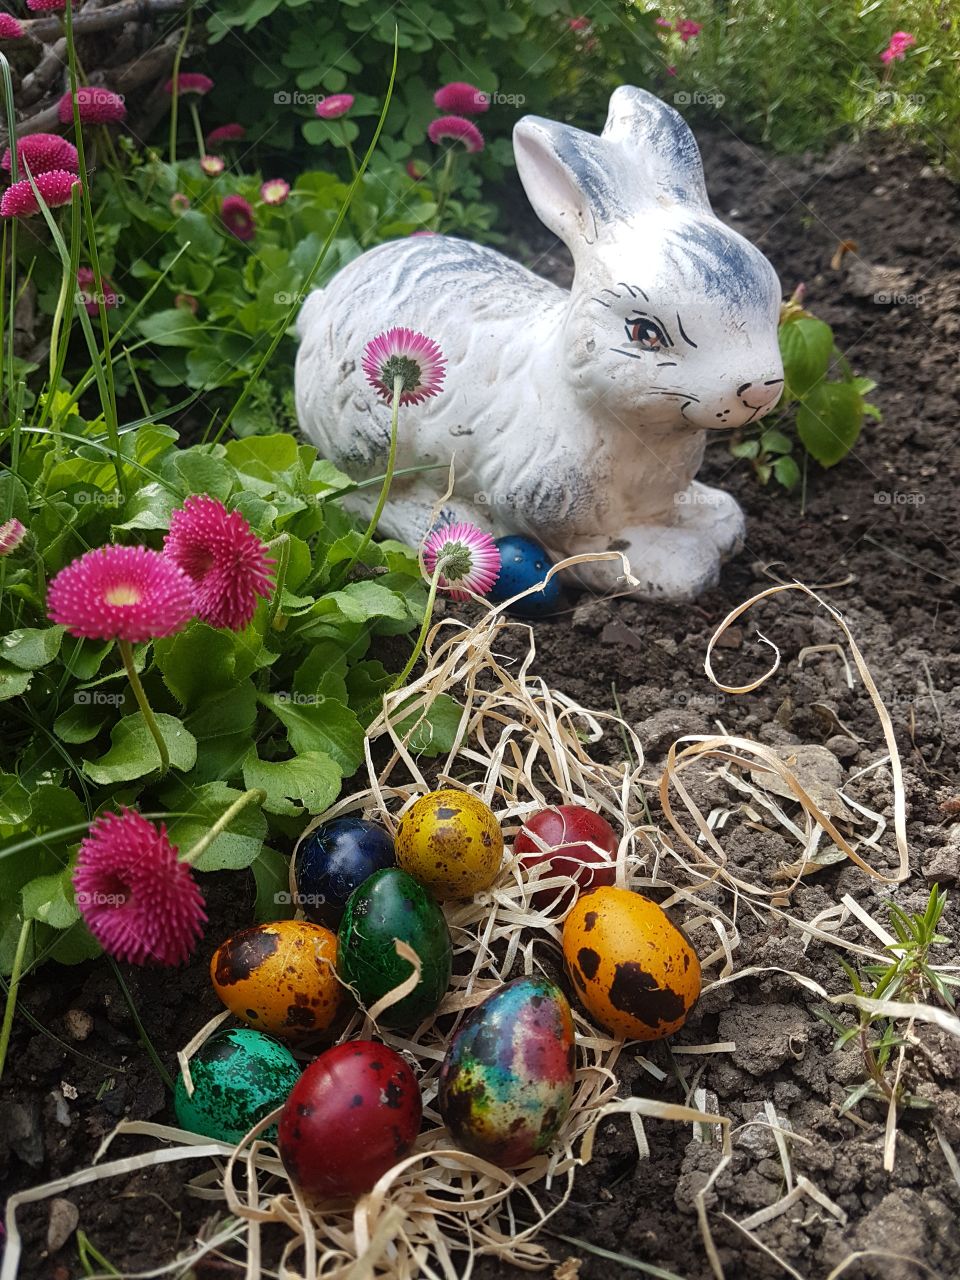 It's Easter time!